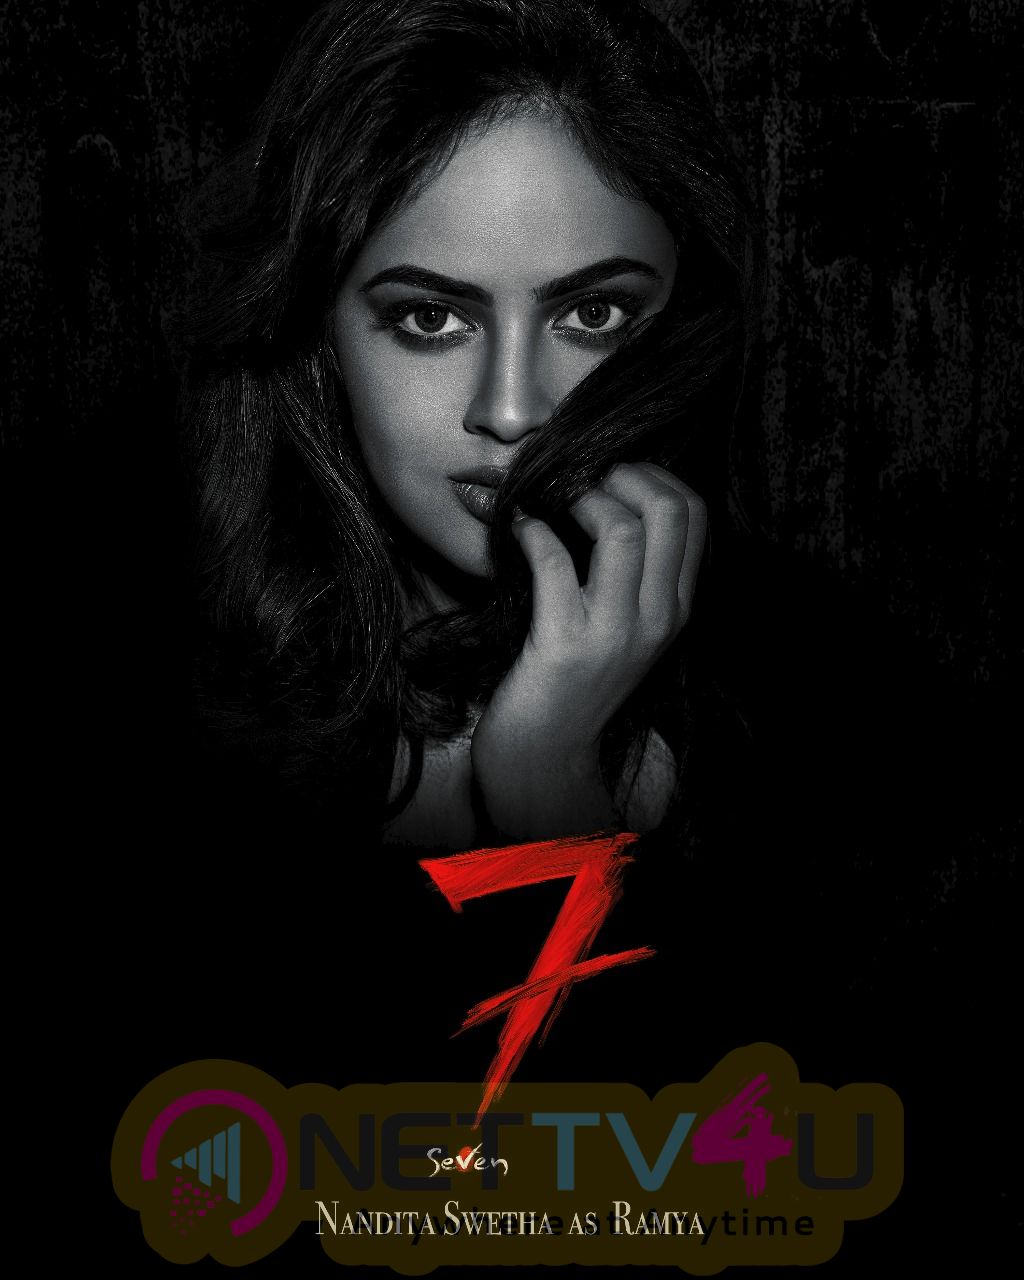 Seven(7) Movie Poster  Tamil Gallery